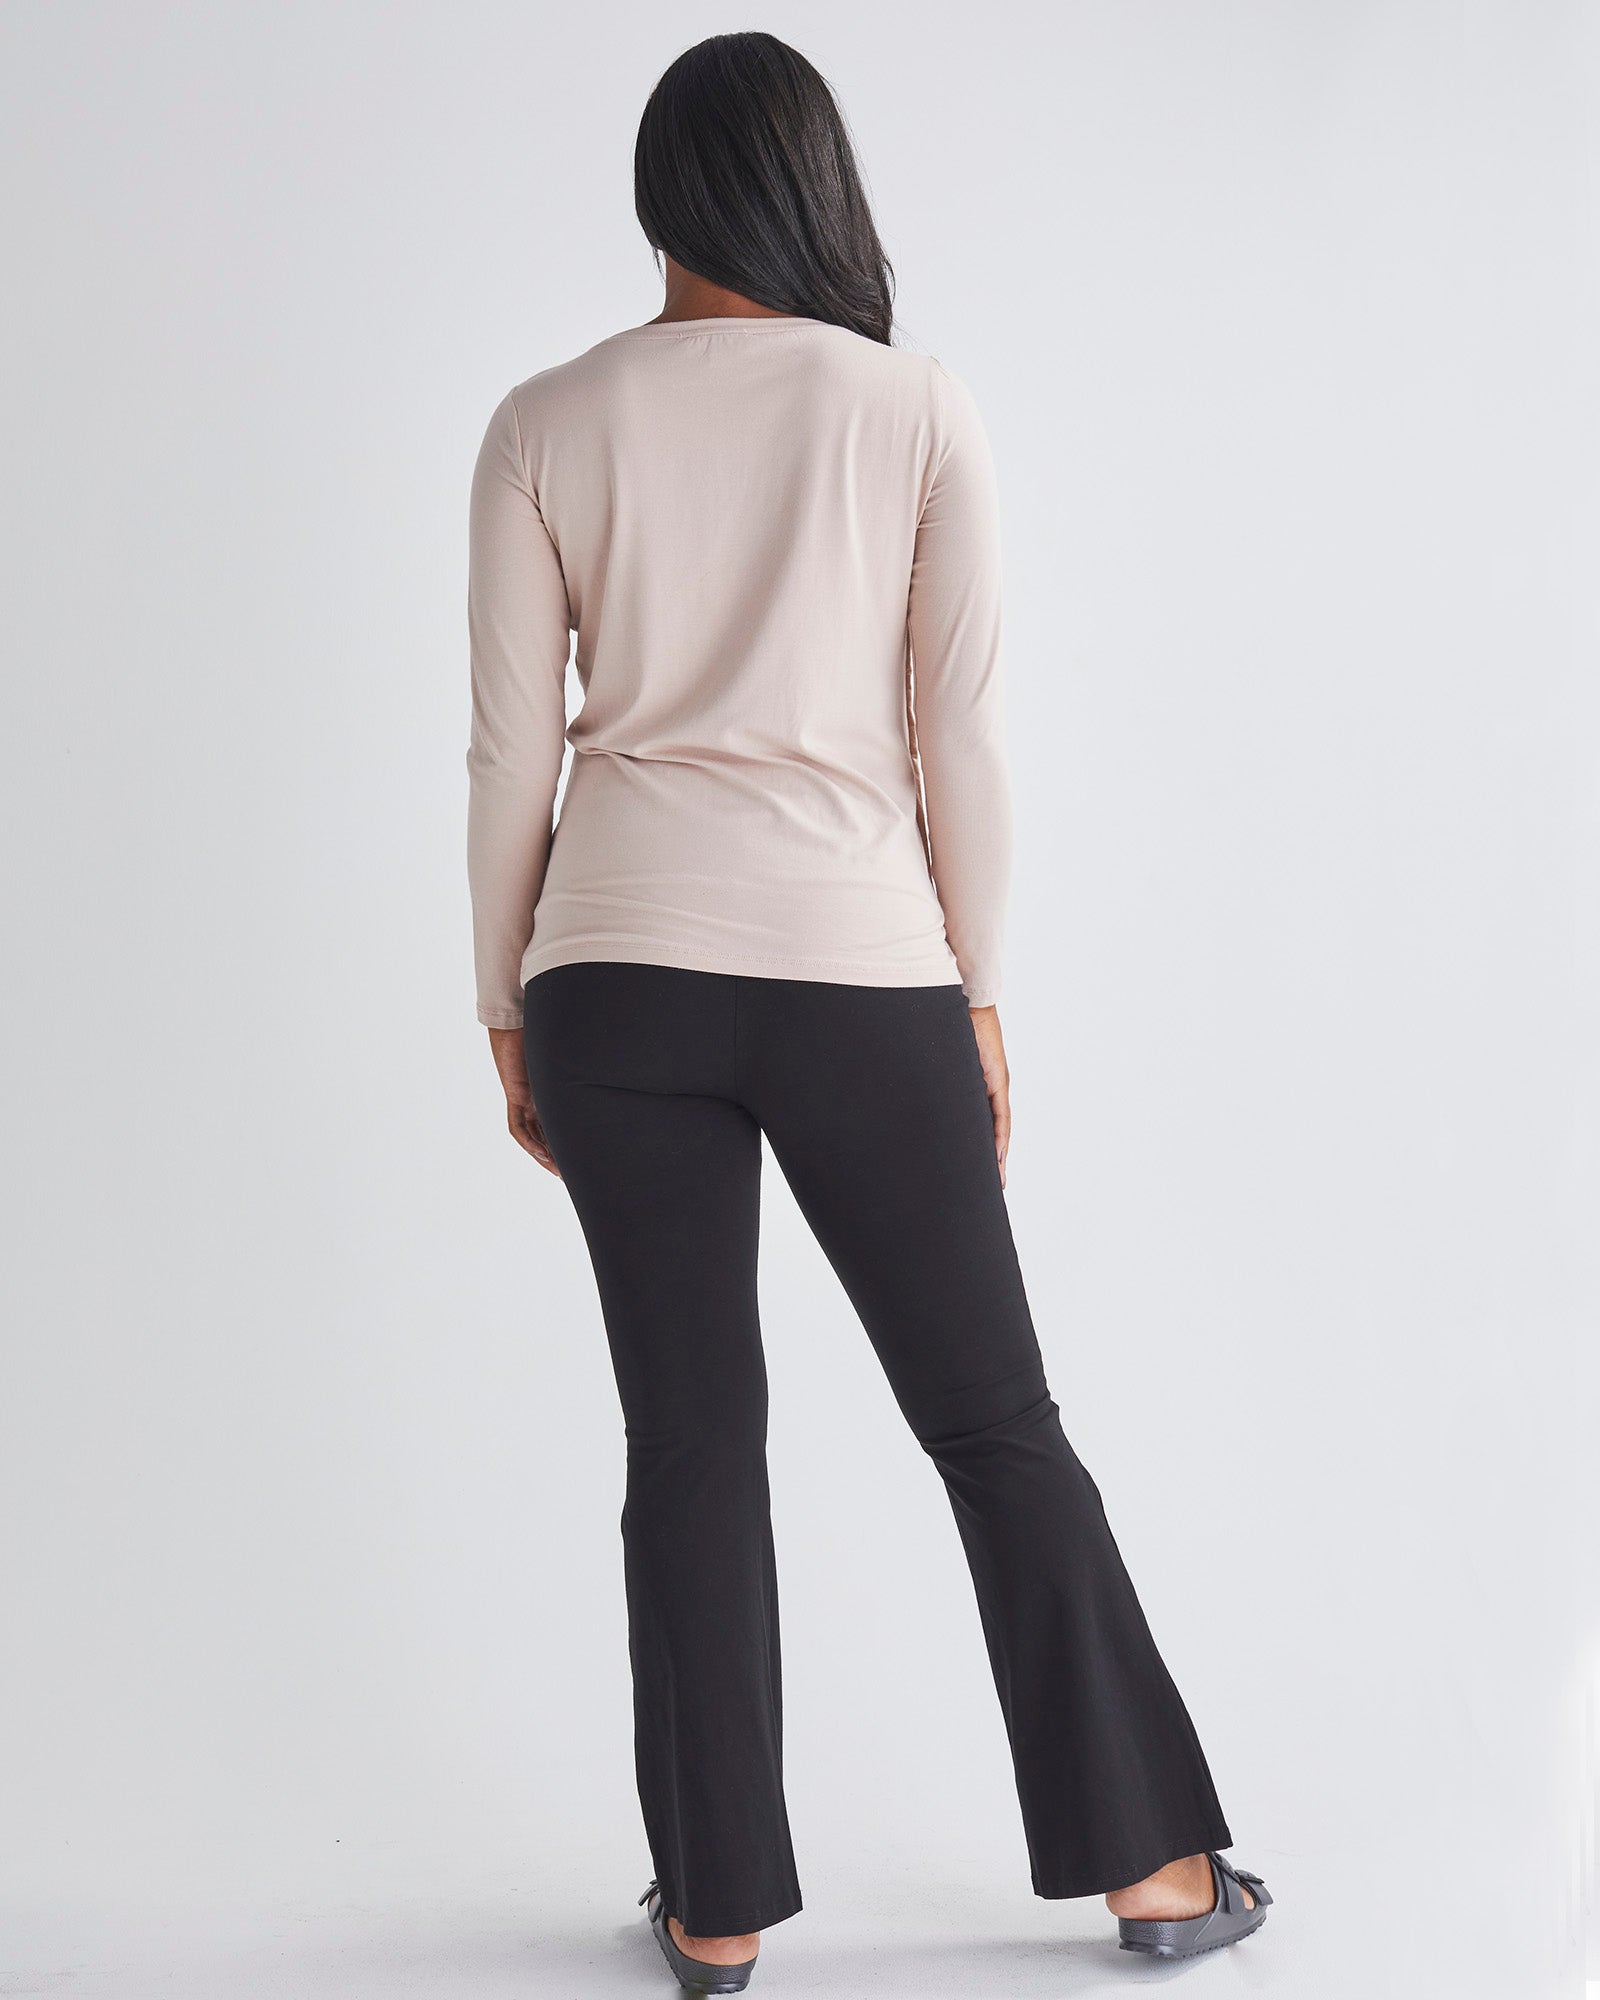 Back View - Long Sleeve  Nursing Petal Top in Blush Pink from Angel Maternity